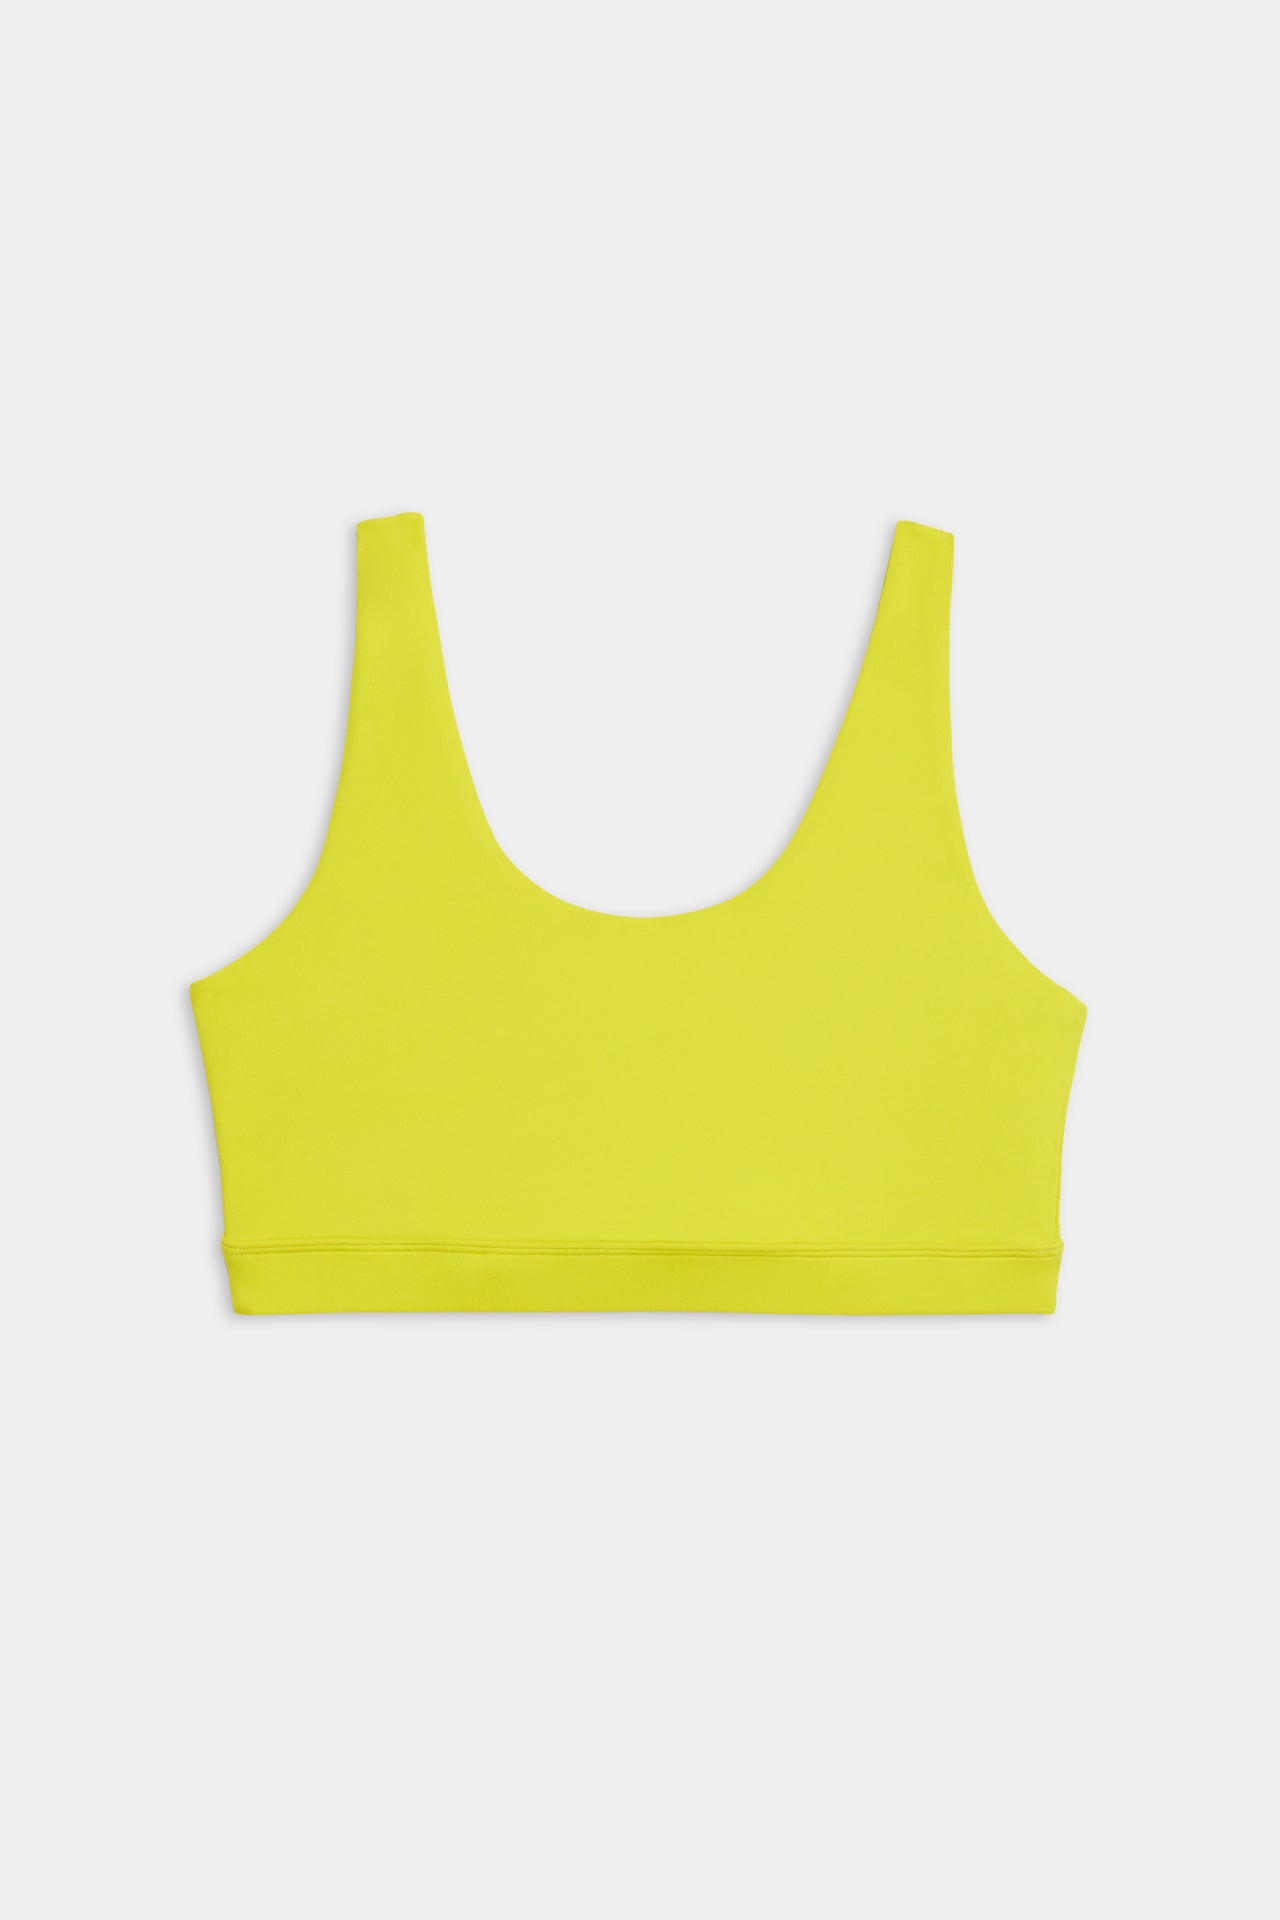 Front flat view of bright yellow bra